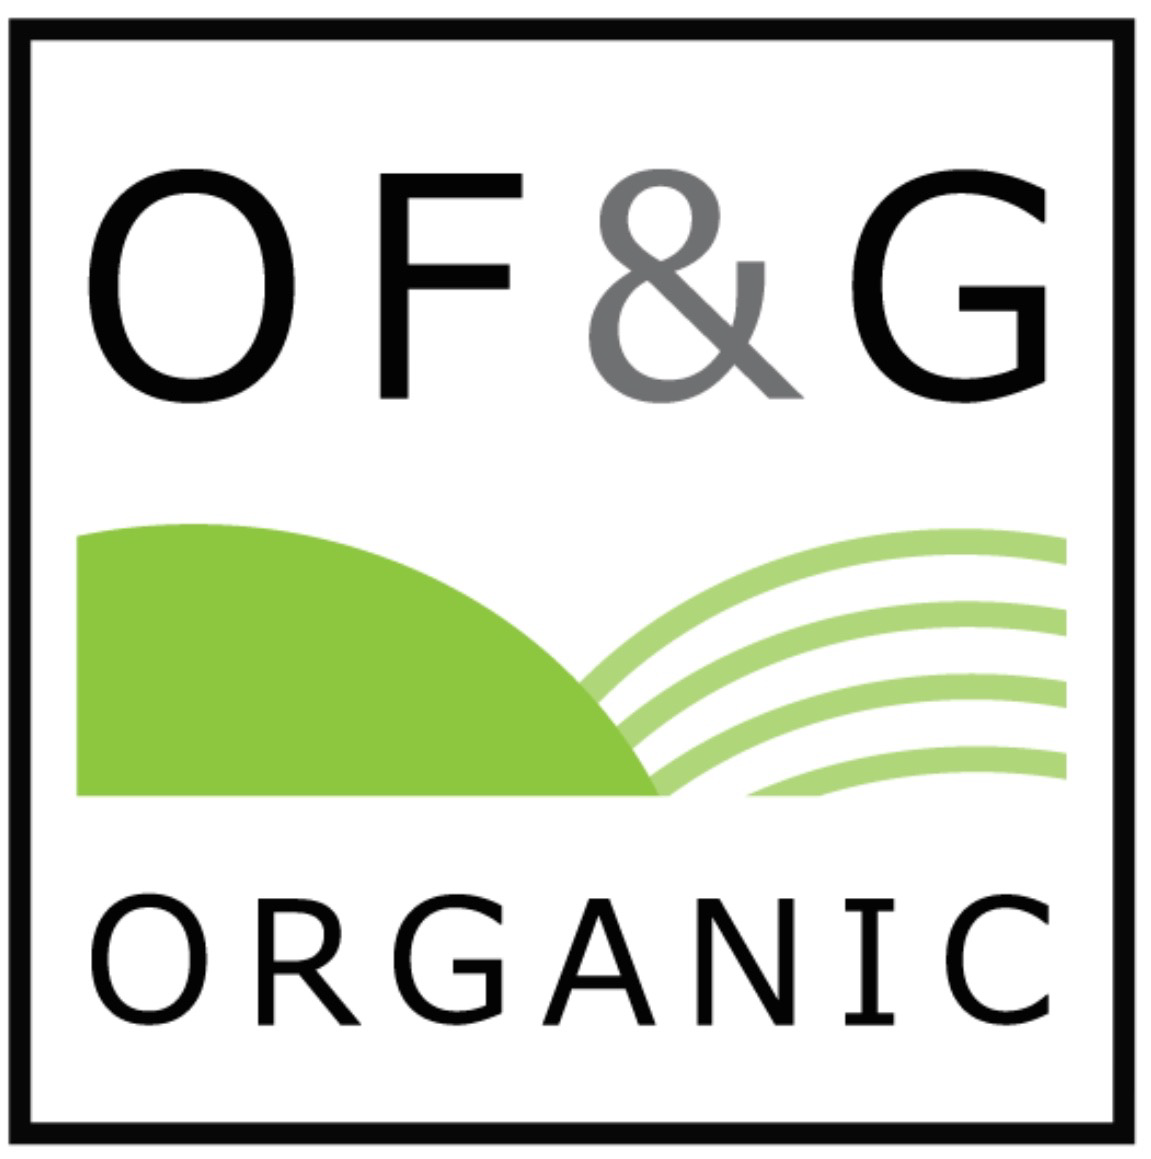 OF&G